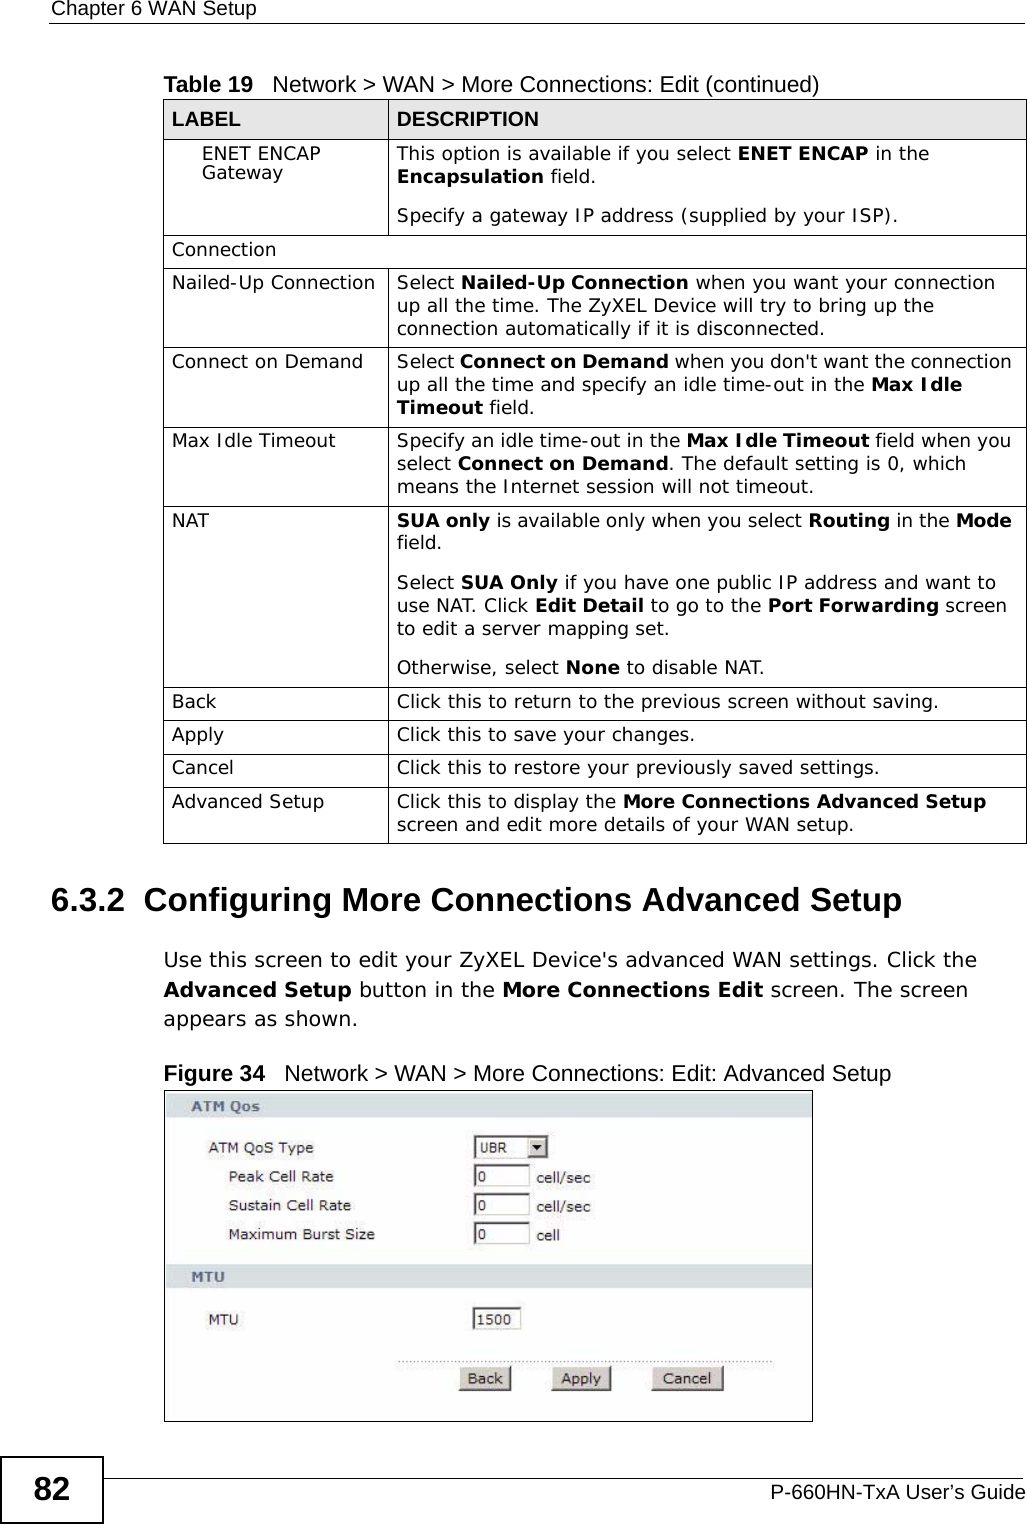 Chapter 6 WAN SetupP-660HN-TxA User’s Guide826.3.2  Configuring More Connections Advanced Setup Use this screen to edit your ZyXEL Device&apos;s advanced WAN settings. Click the Advanced Setup button in the More Connections Edit screen. The screen appears as shown.Figure 34   Network &gt; WAN &gt; More Connections: Edit: Advanced SetupENET ENCAP Gateway This option is available if you select ENET ENCAP in the Encapsulation field.Specify a gateway IP address (supplied by your ISP).ConnectionNailed-Up Connection Select Nailed-Up Connection when you want your connection up all the time. The ZyXEL Device will try to bring up the connection automatically if it is disconnected.Connect on Demand Select Connect on Demand when you don&apos;t want the connection up all the time and specify an idle time-out in the Max Idle Timeout field.Max Idle Timeout Specify an idle time-out in the Max Idle Timeout field when you select Connect on Demand. The default setting is 0, which means the Internet session will not timeout.NAT SUA only is available only when you select Routing in the Mode field.Select SUA Only if you have one public IP address and want to use NAT. Click Edit Detail to go to the Port Forwarding screen to edit a server mapping set. Otherwise, select None to disable NAT.Back Click this to return to the previous screen without saving.Apply Click this to save your changes. Cancel Click this to restore your previously saved settings.Advanced Setup Click this to display the More Connections Advanced Setup screen and edit more details of your WAN setup.Table 19   Network &gt; WAN &gt; More Connections: Edit (continued)LABEL DESCRIPTION